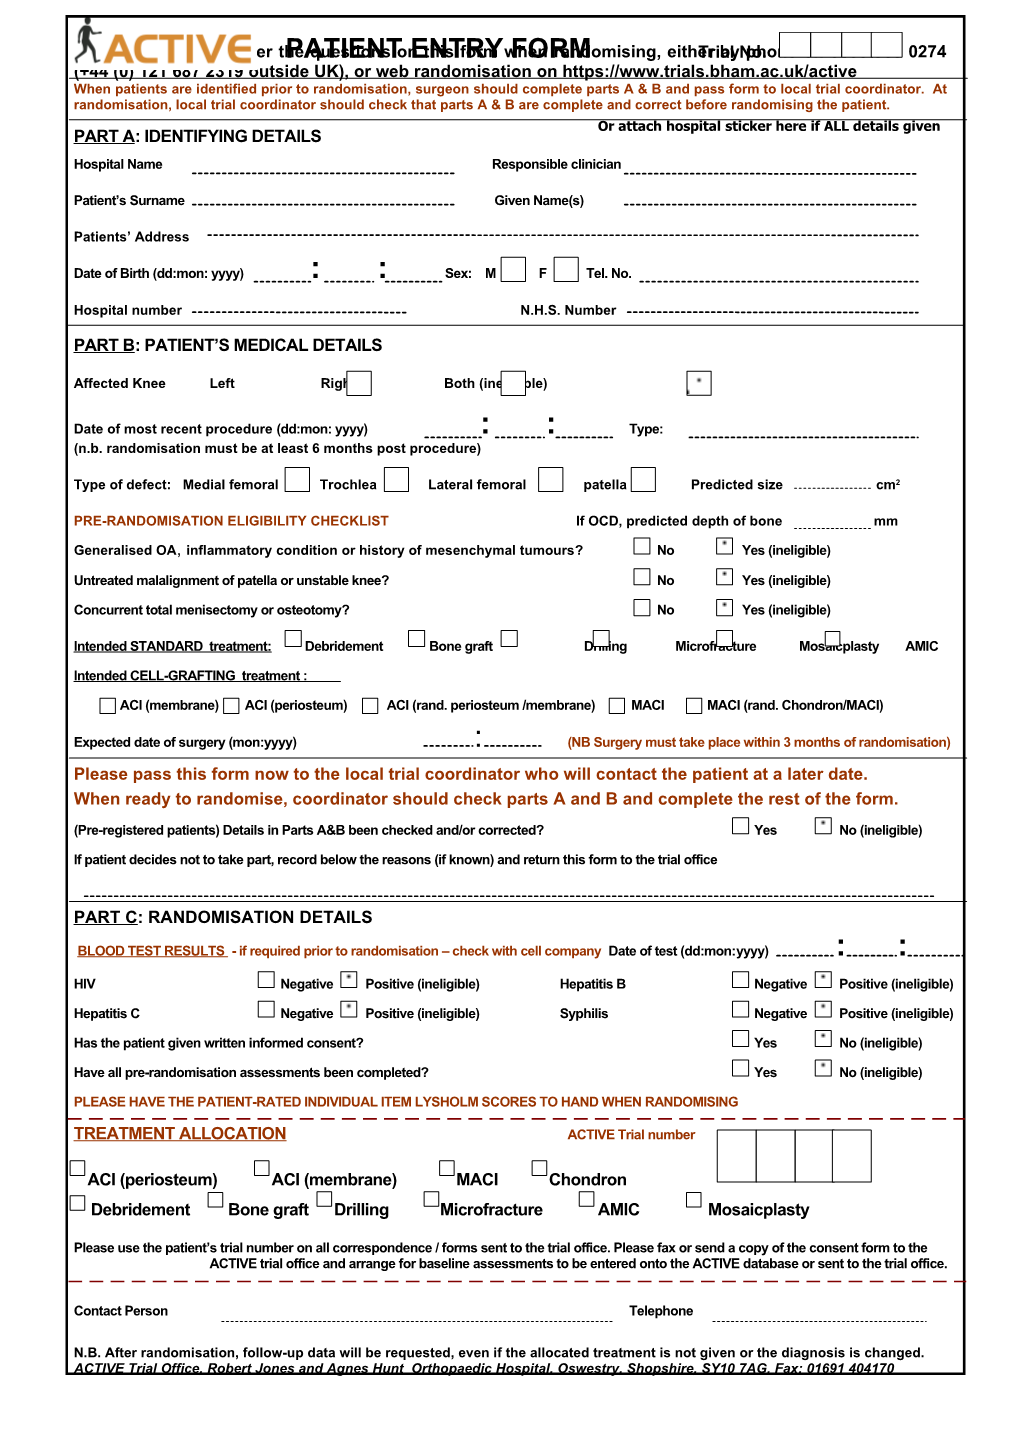 You Will Need to Answer the Questions on This Form When Randomising, Either by Phone On